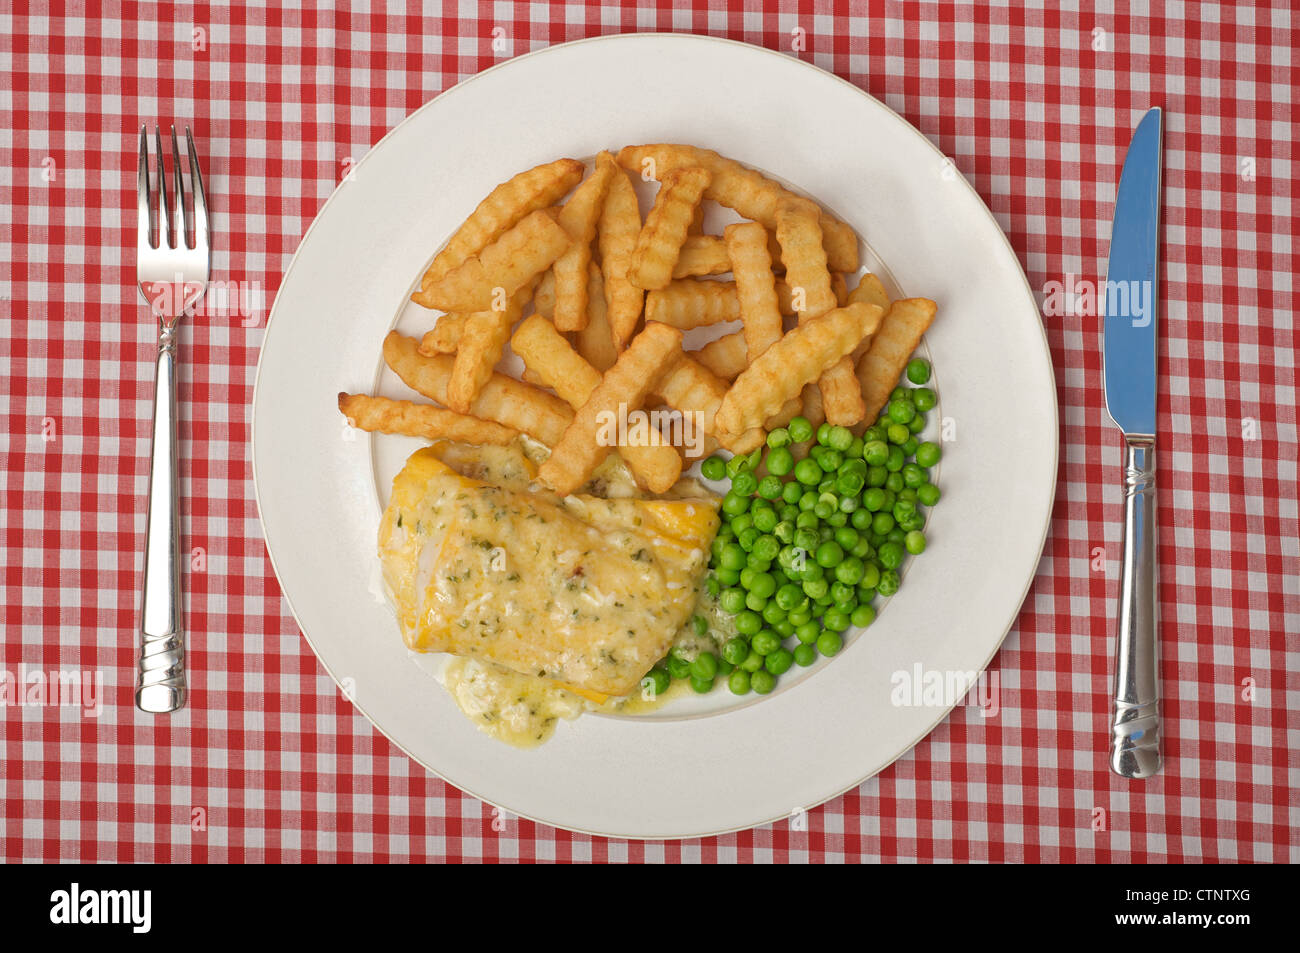 The Saucy Fish Co. Davidstow cheddar and chive sauce on smoked Haddock, chips and peas Stock Photo